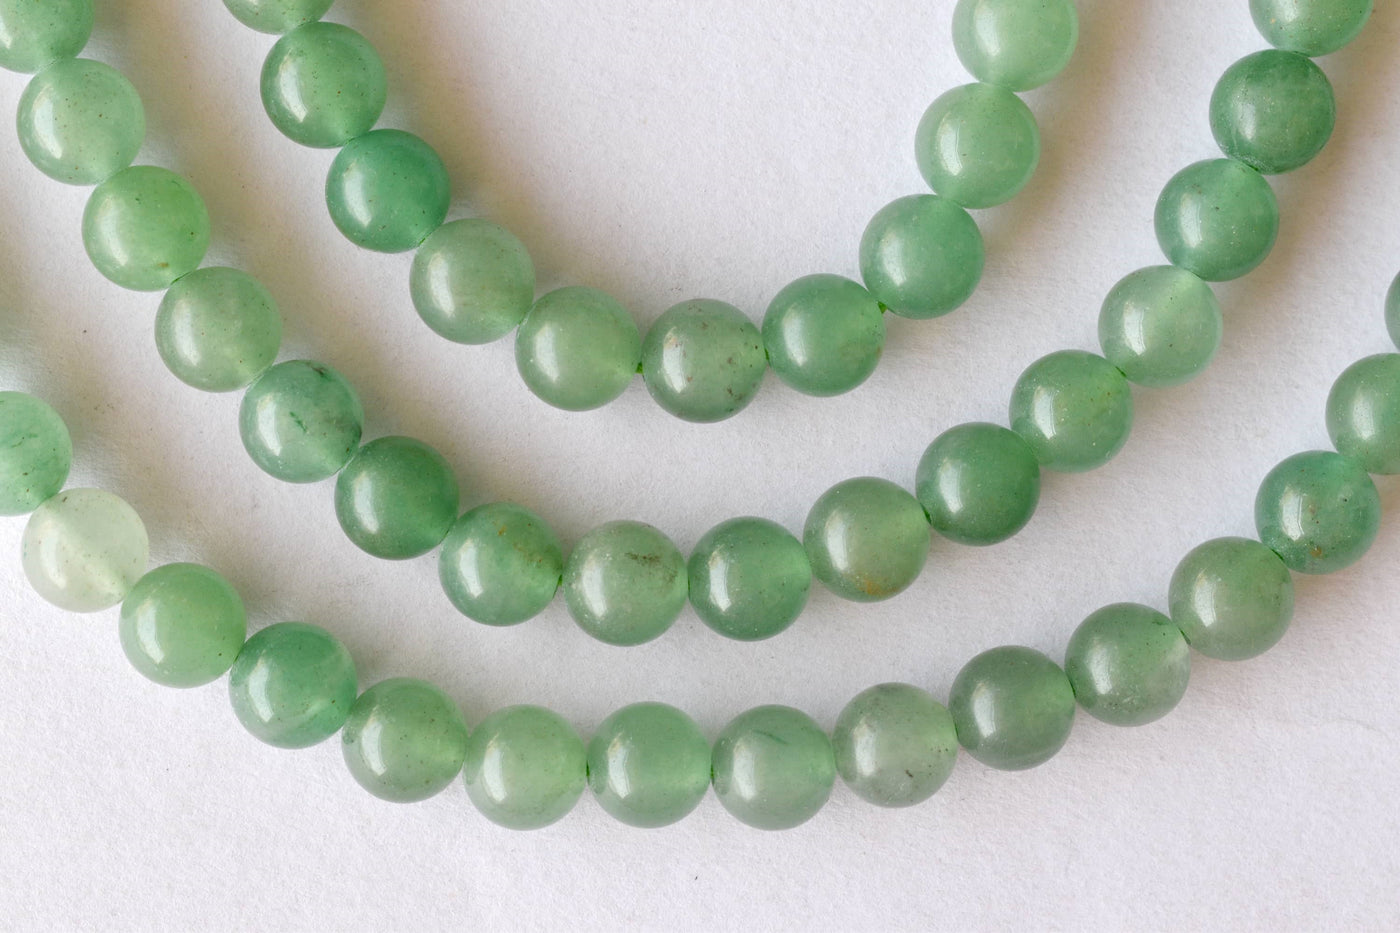 Green Aventurine Beads, Natural Round Crystal Beads 4mm to 12mm